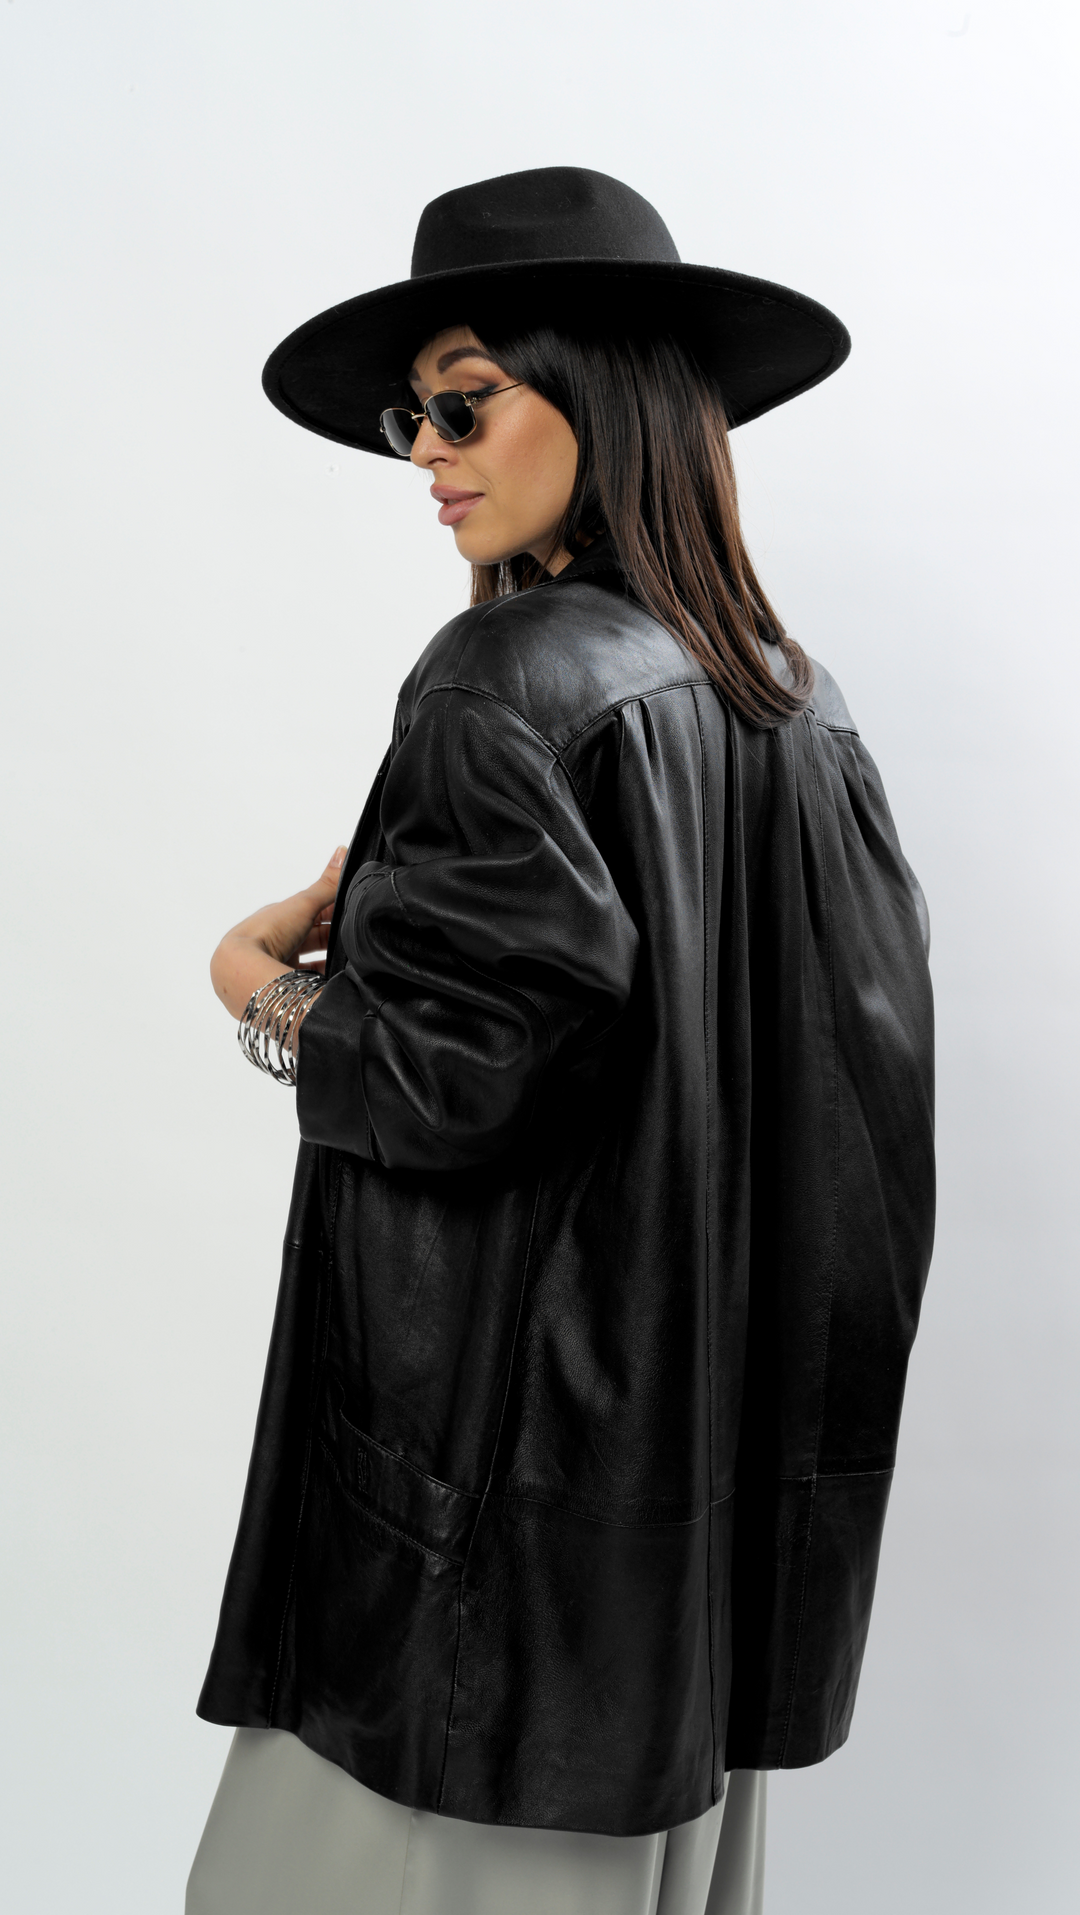 Vintage leather jacket "BEAA x SFINKSA" BeaA - Be At Home with Yourself